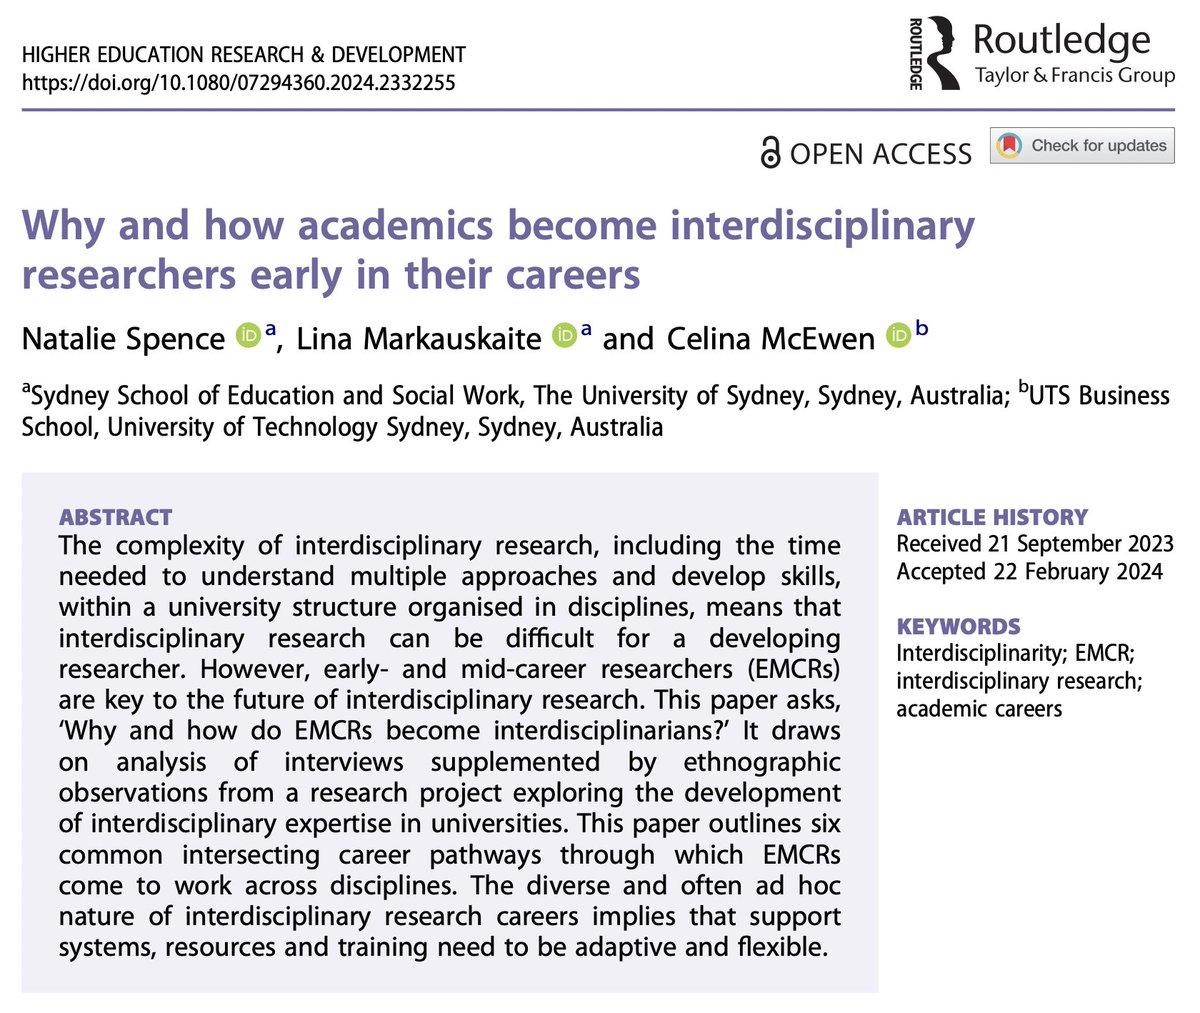 Why and how academics become interdisciplinary researchers early in their careers @Pedepede2 @Markauskaite & @CelinaMcEwen 🔓→ doi.org/10.1080/072943… #HigherEd #ECRs #EarlyCareerResearchers #InterdisciplinaryResearchers #Academics #InterdisciplinaryResearch #AcademicCareers